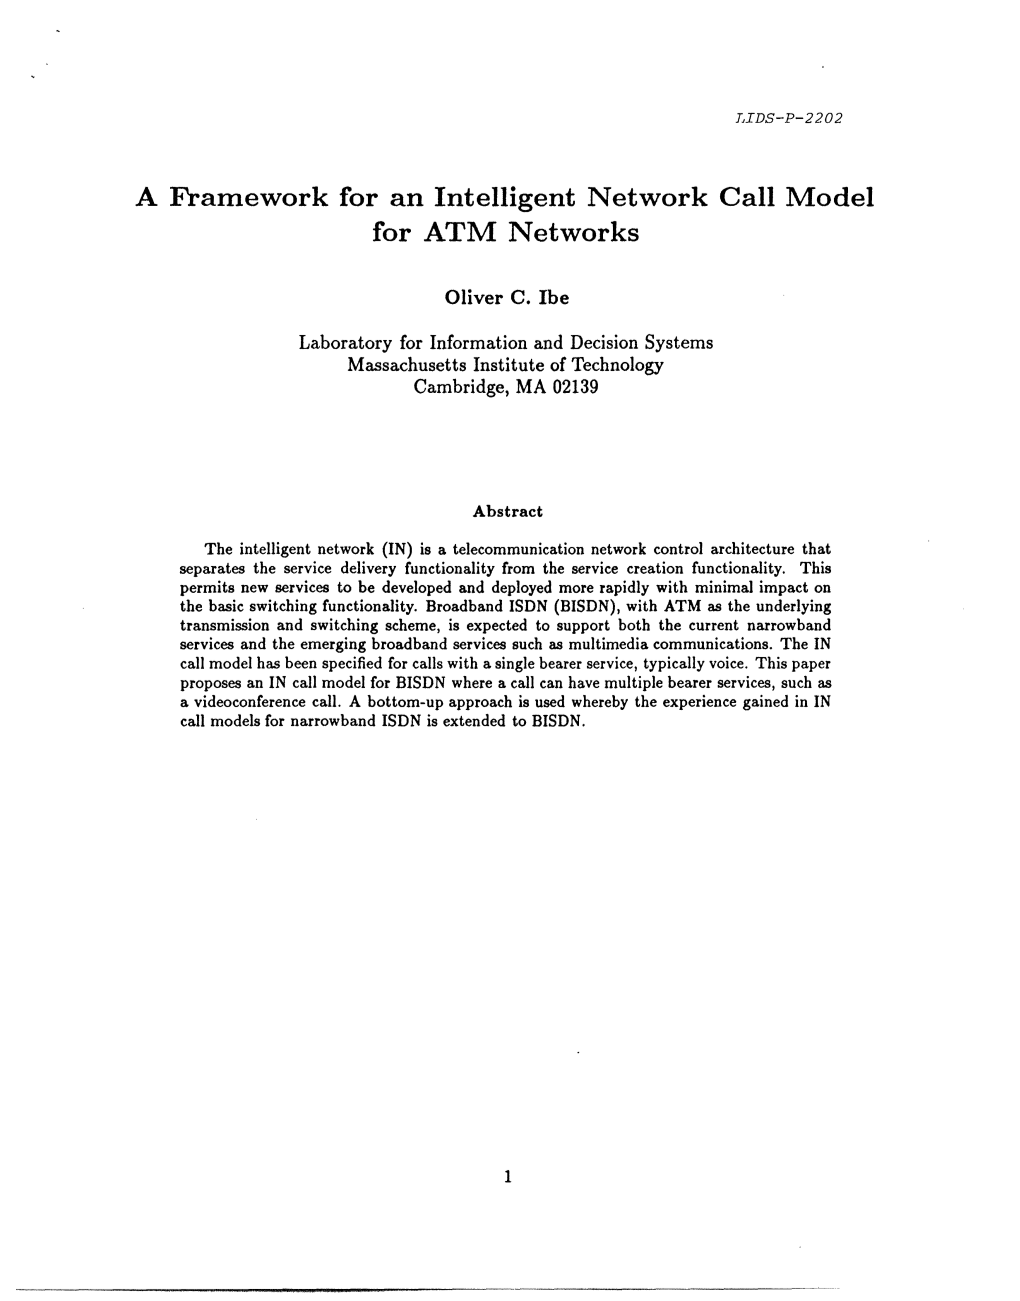 A Framework for an Intelligent Network Call Model for ATM Networks